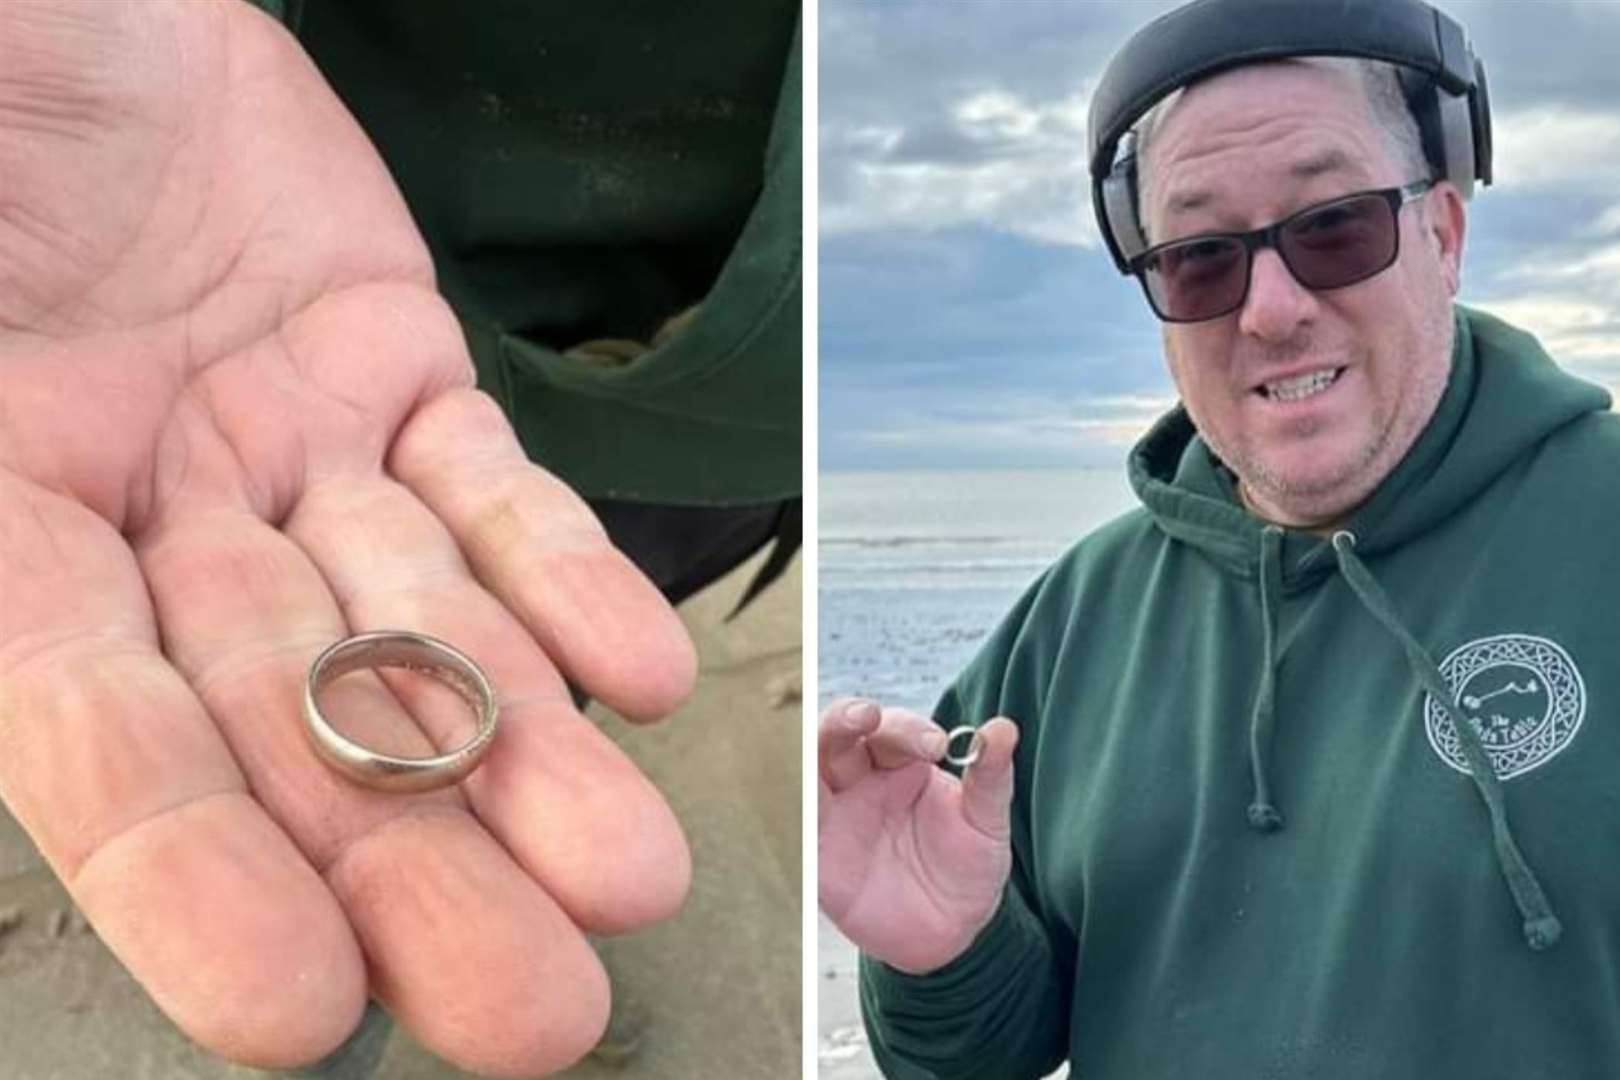 Brendan Sansom and Kris Alden, pictured, found the ring three days after it was lost. Picture: Emily Wolstenholme